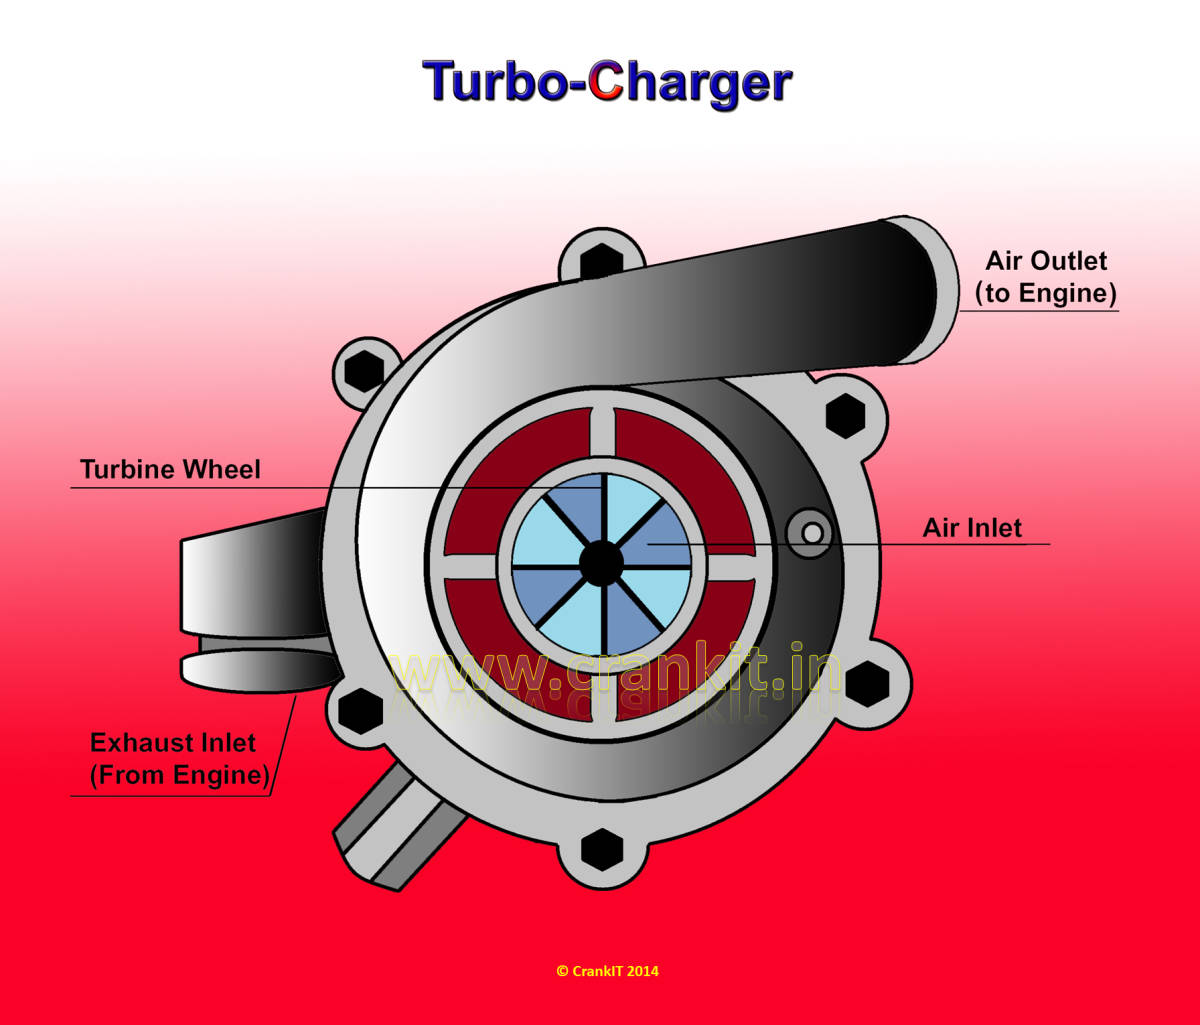 Find out How a Turbocharger works - Turbocharger DiagramCrankit